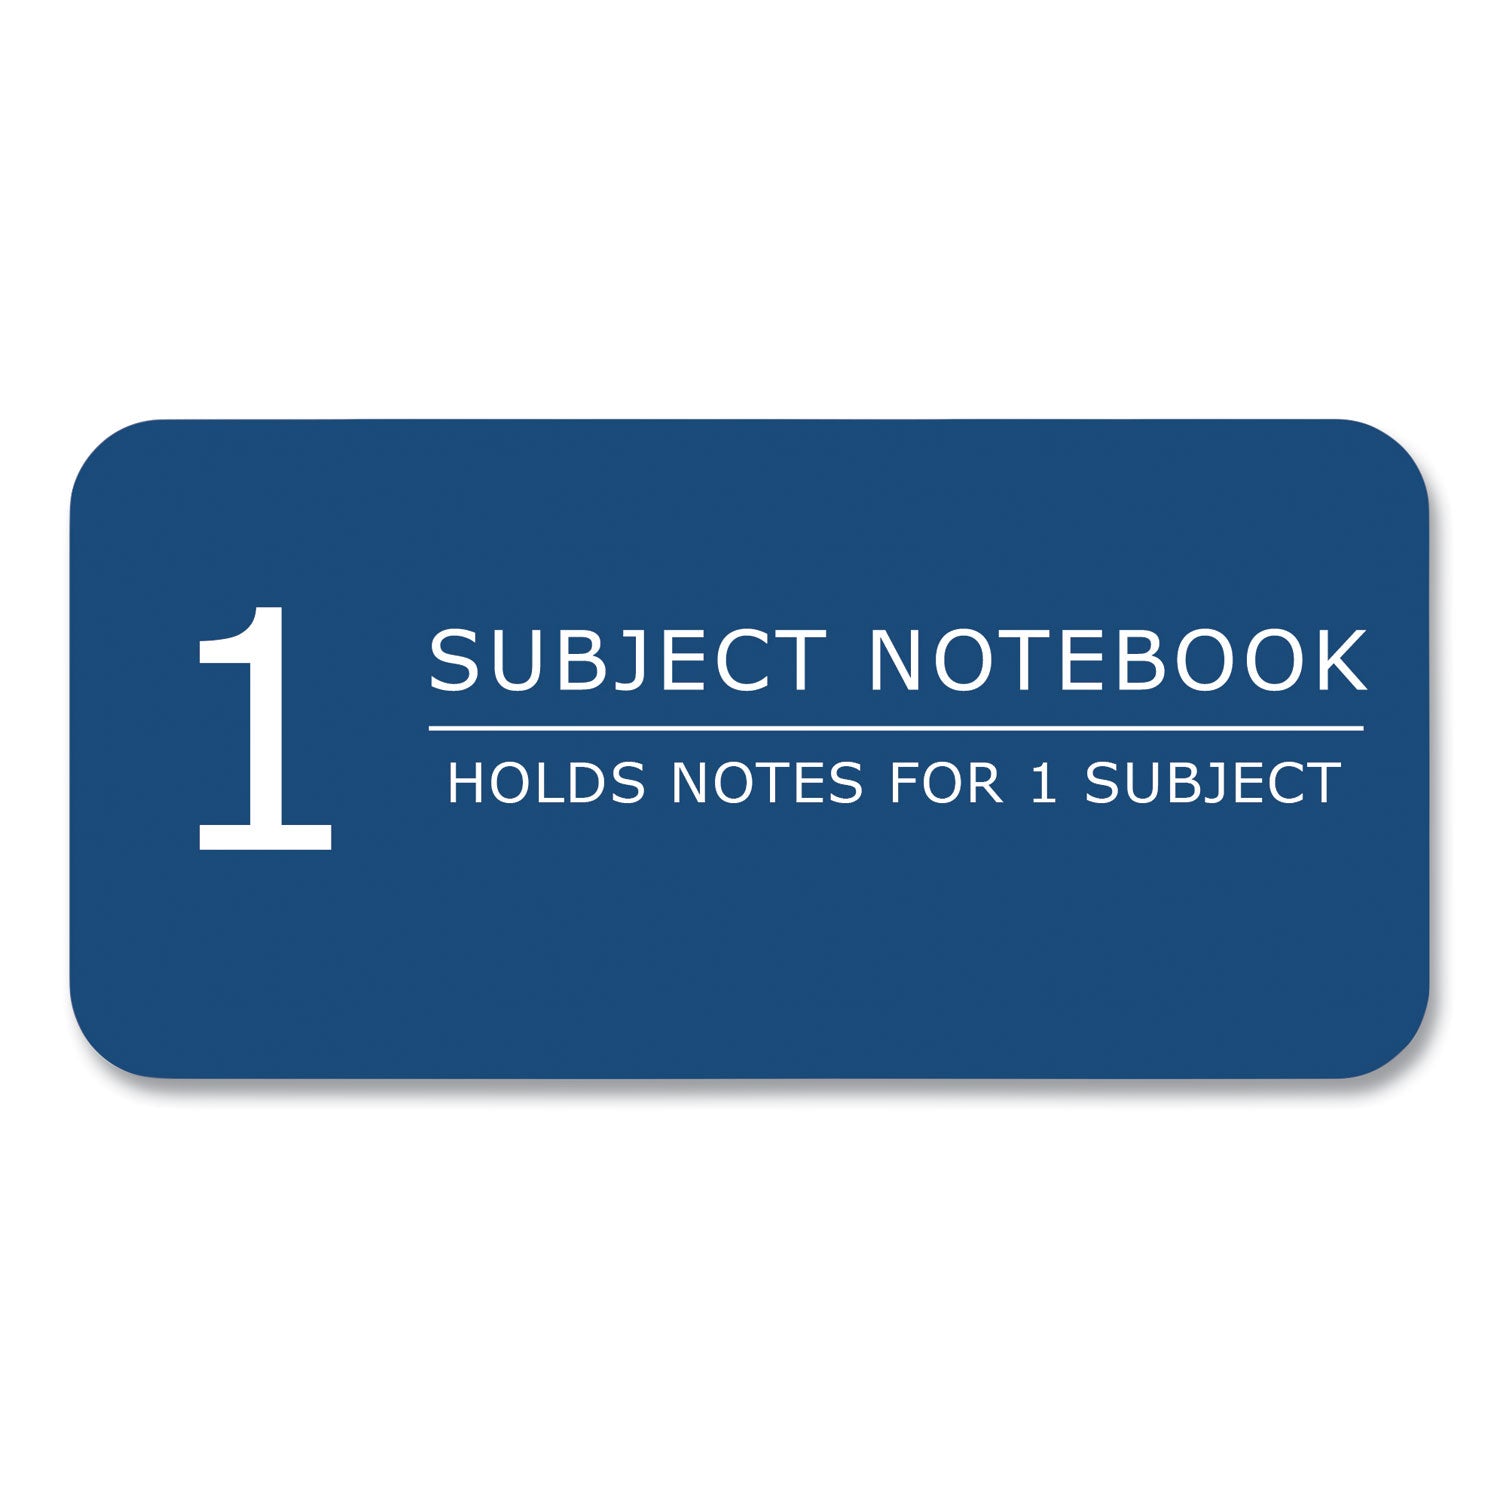 subject-wirebound-promo-notebook-1-subject-4-sq-in-quad-rule-asst-cover-100-105x8-sheets-24-ct-ships-in-4-6-bus-days_roa10004cs - 4